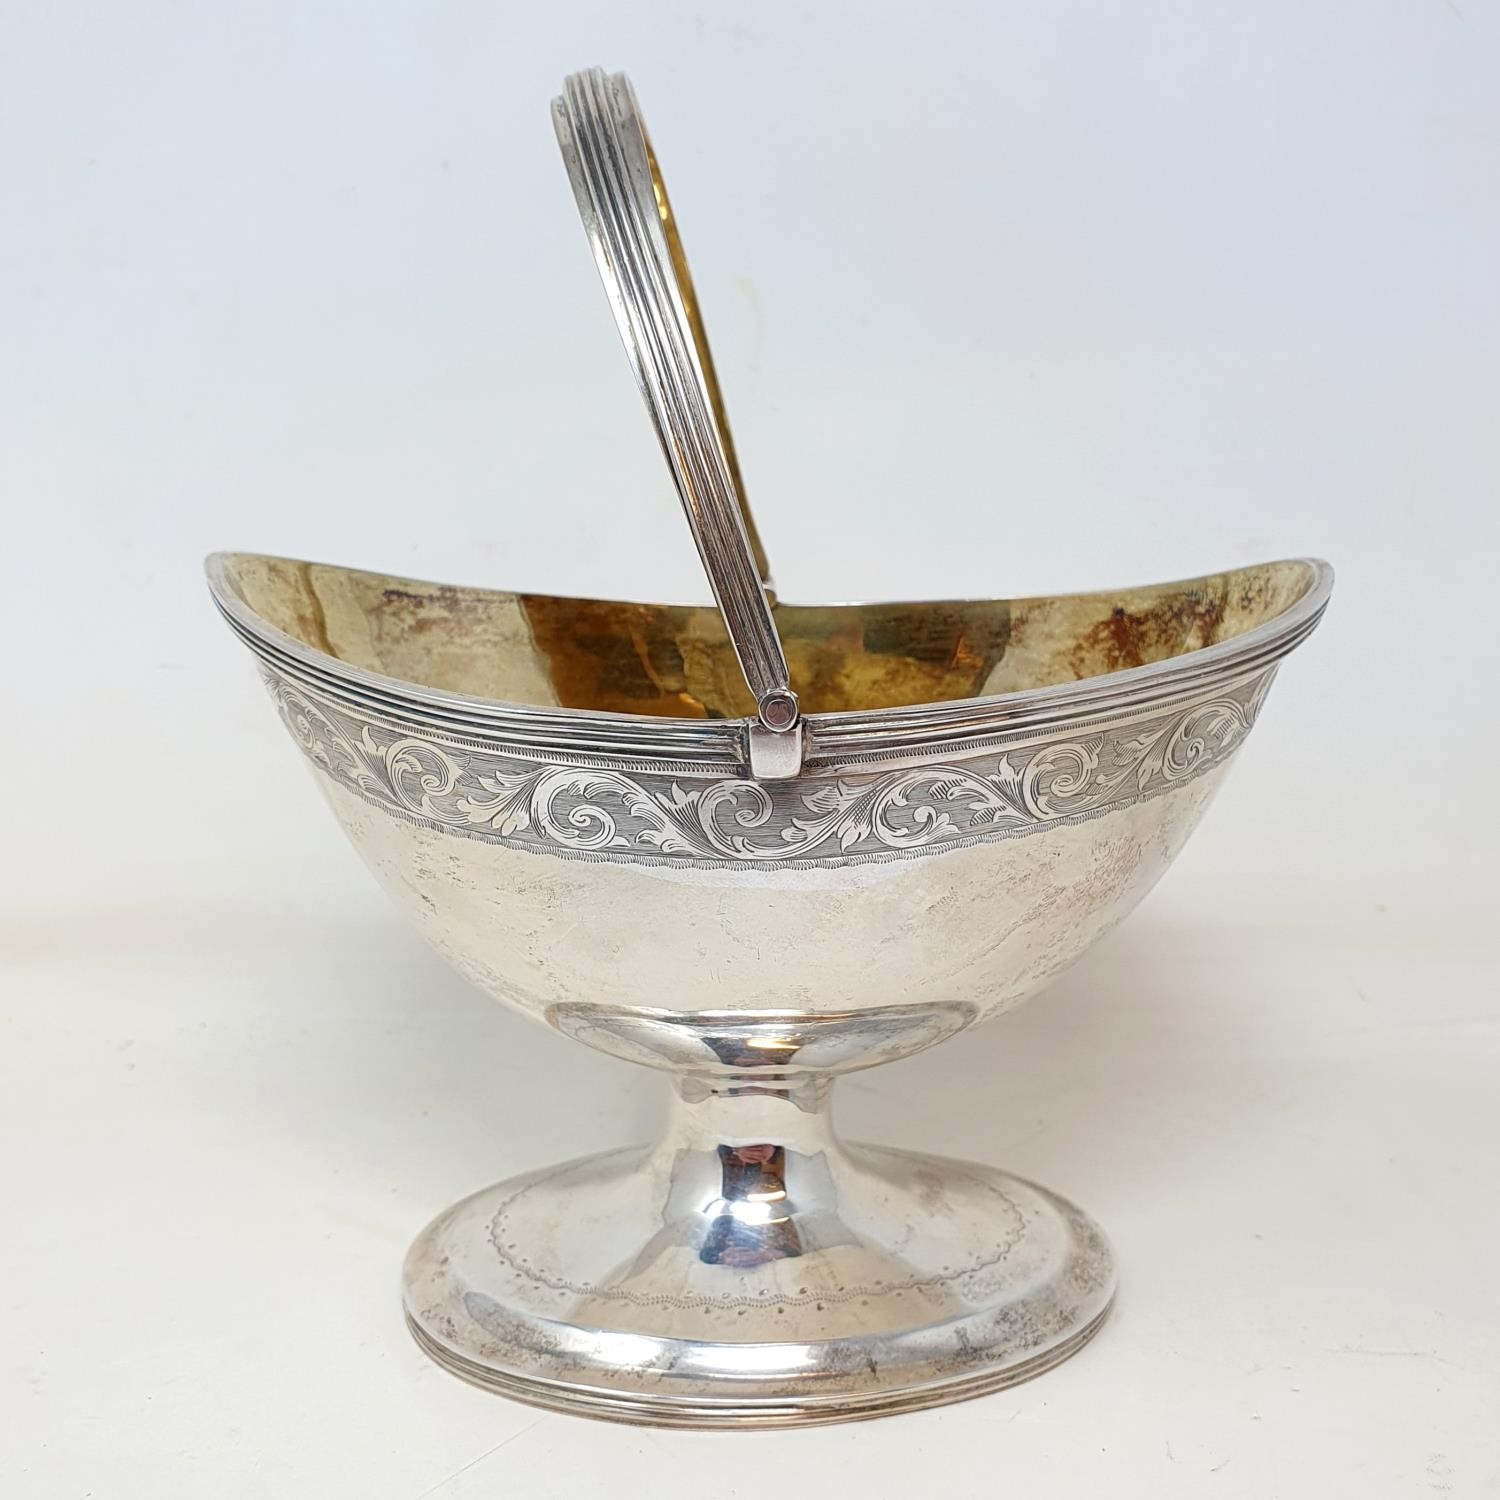 A Victorian silver sugar basket, with a swing handle and engraved decoration, on an oval pedestal - Image 2 of 4